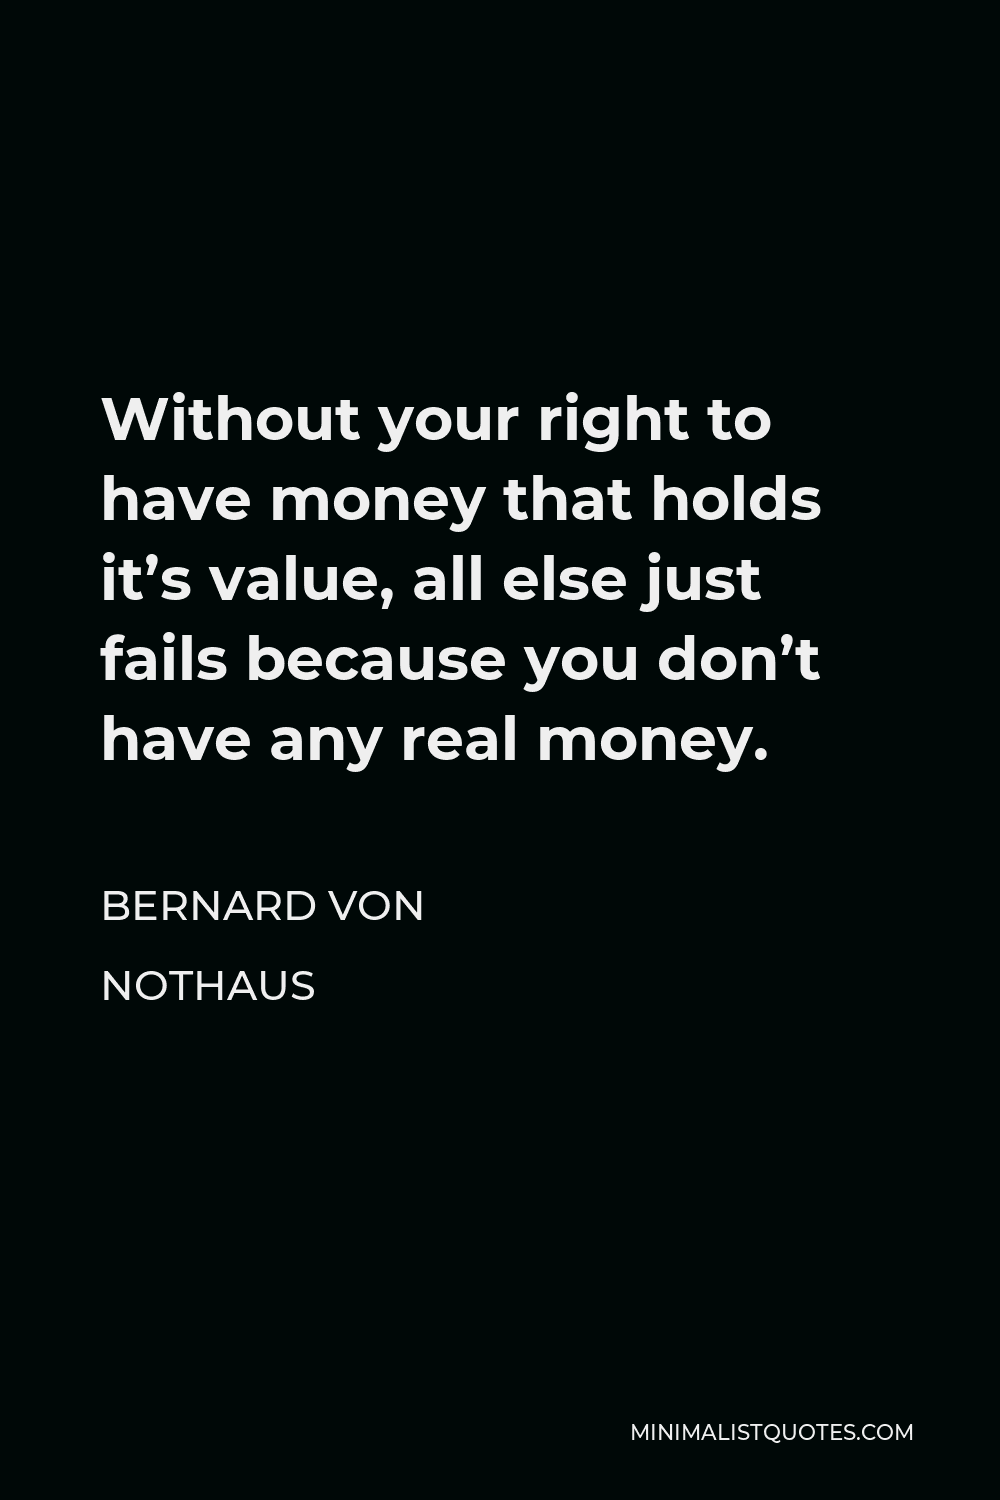 Bernard von NotHaus Quote - Without your right to have money that holds it’s value, all else just fails because you don’t have any real money.